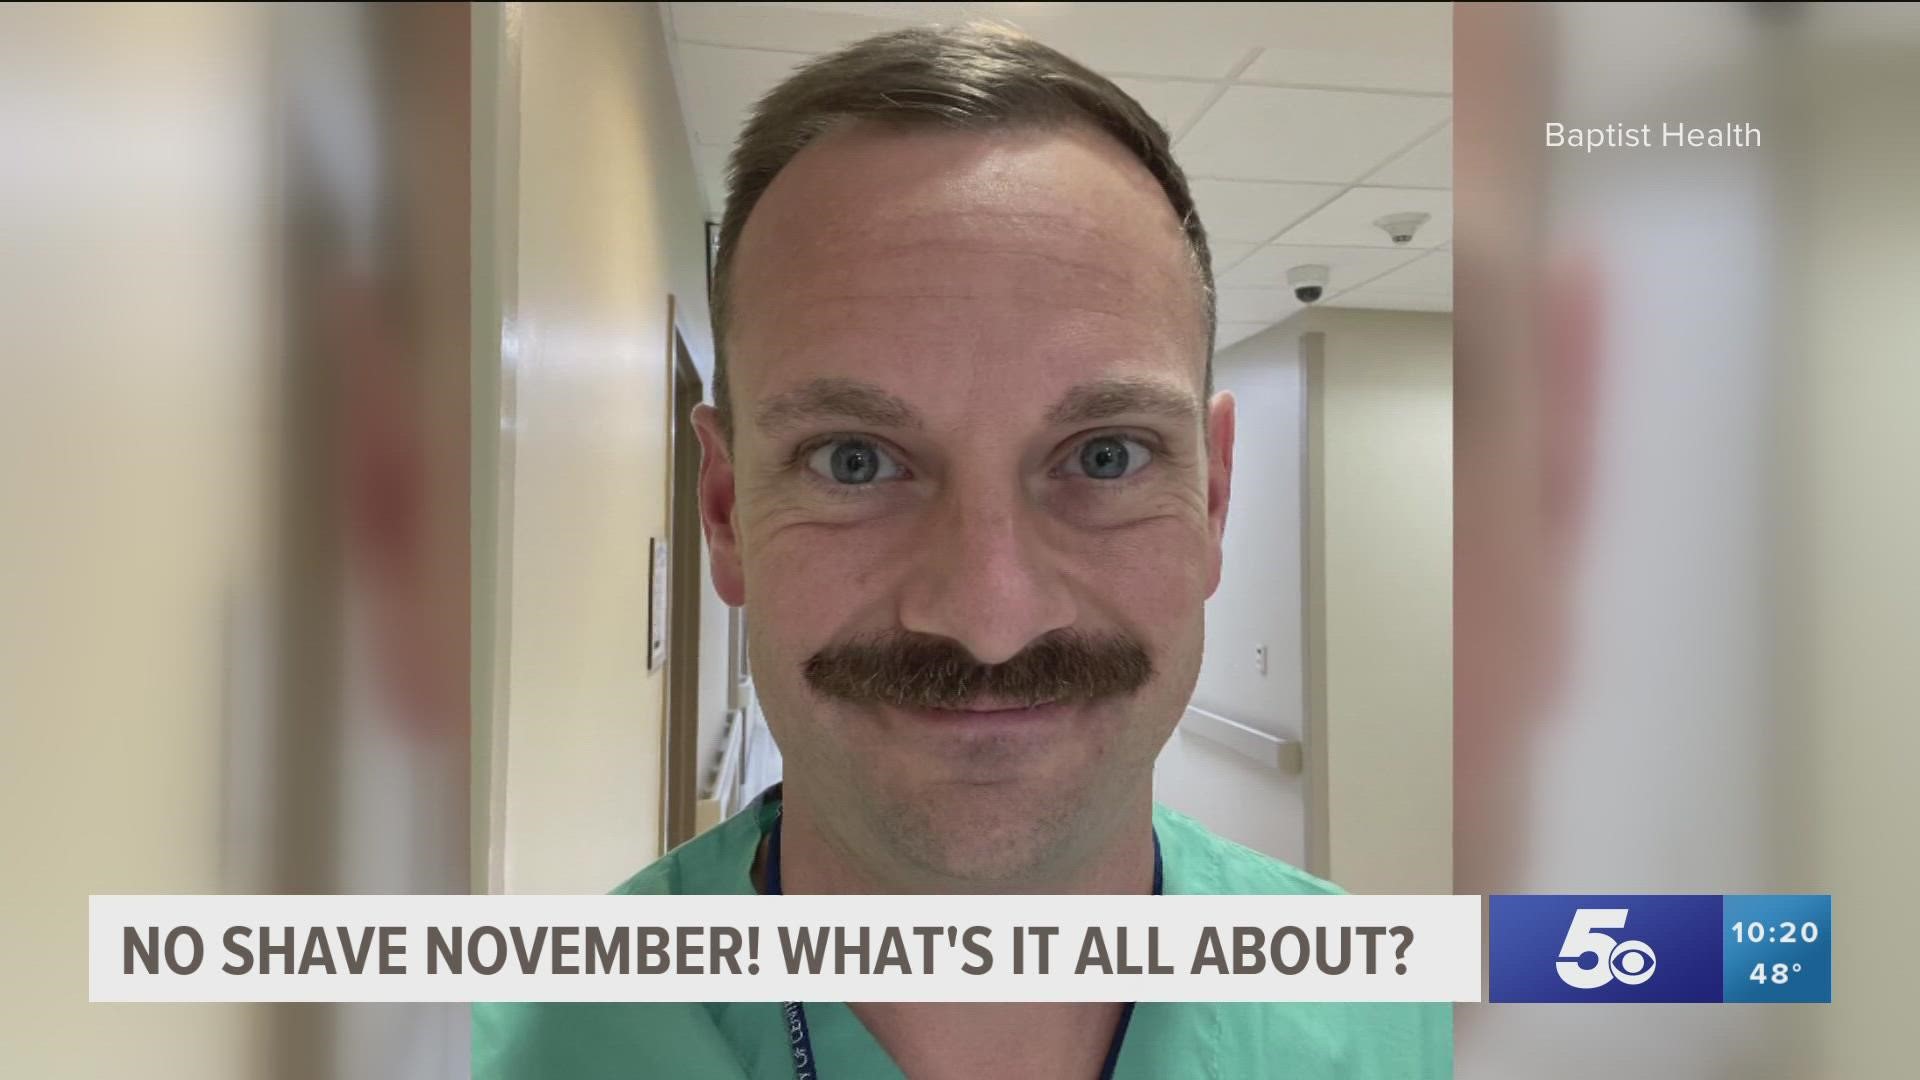 No-shave November is in full swing. How does the month of awareness help with physical and mental health for all?